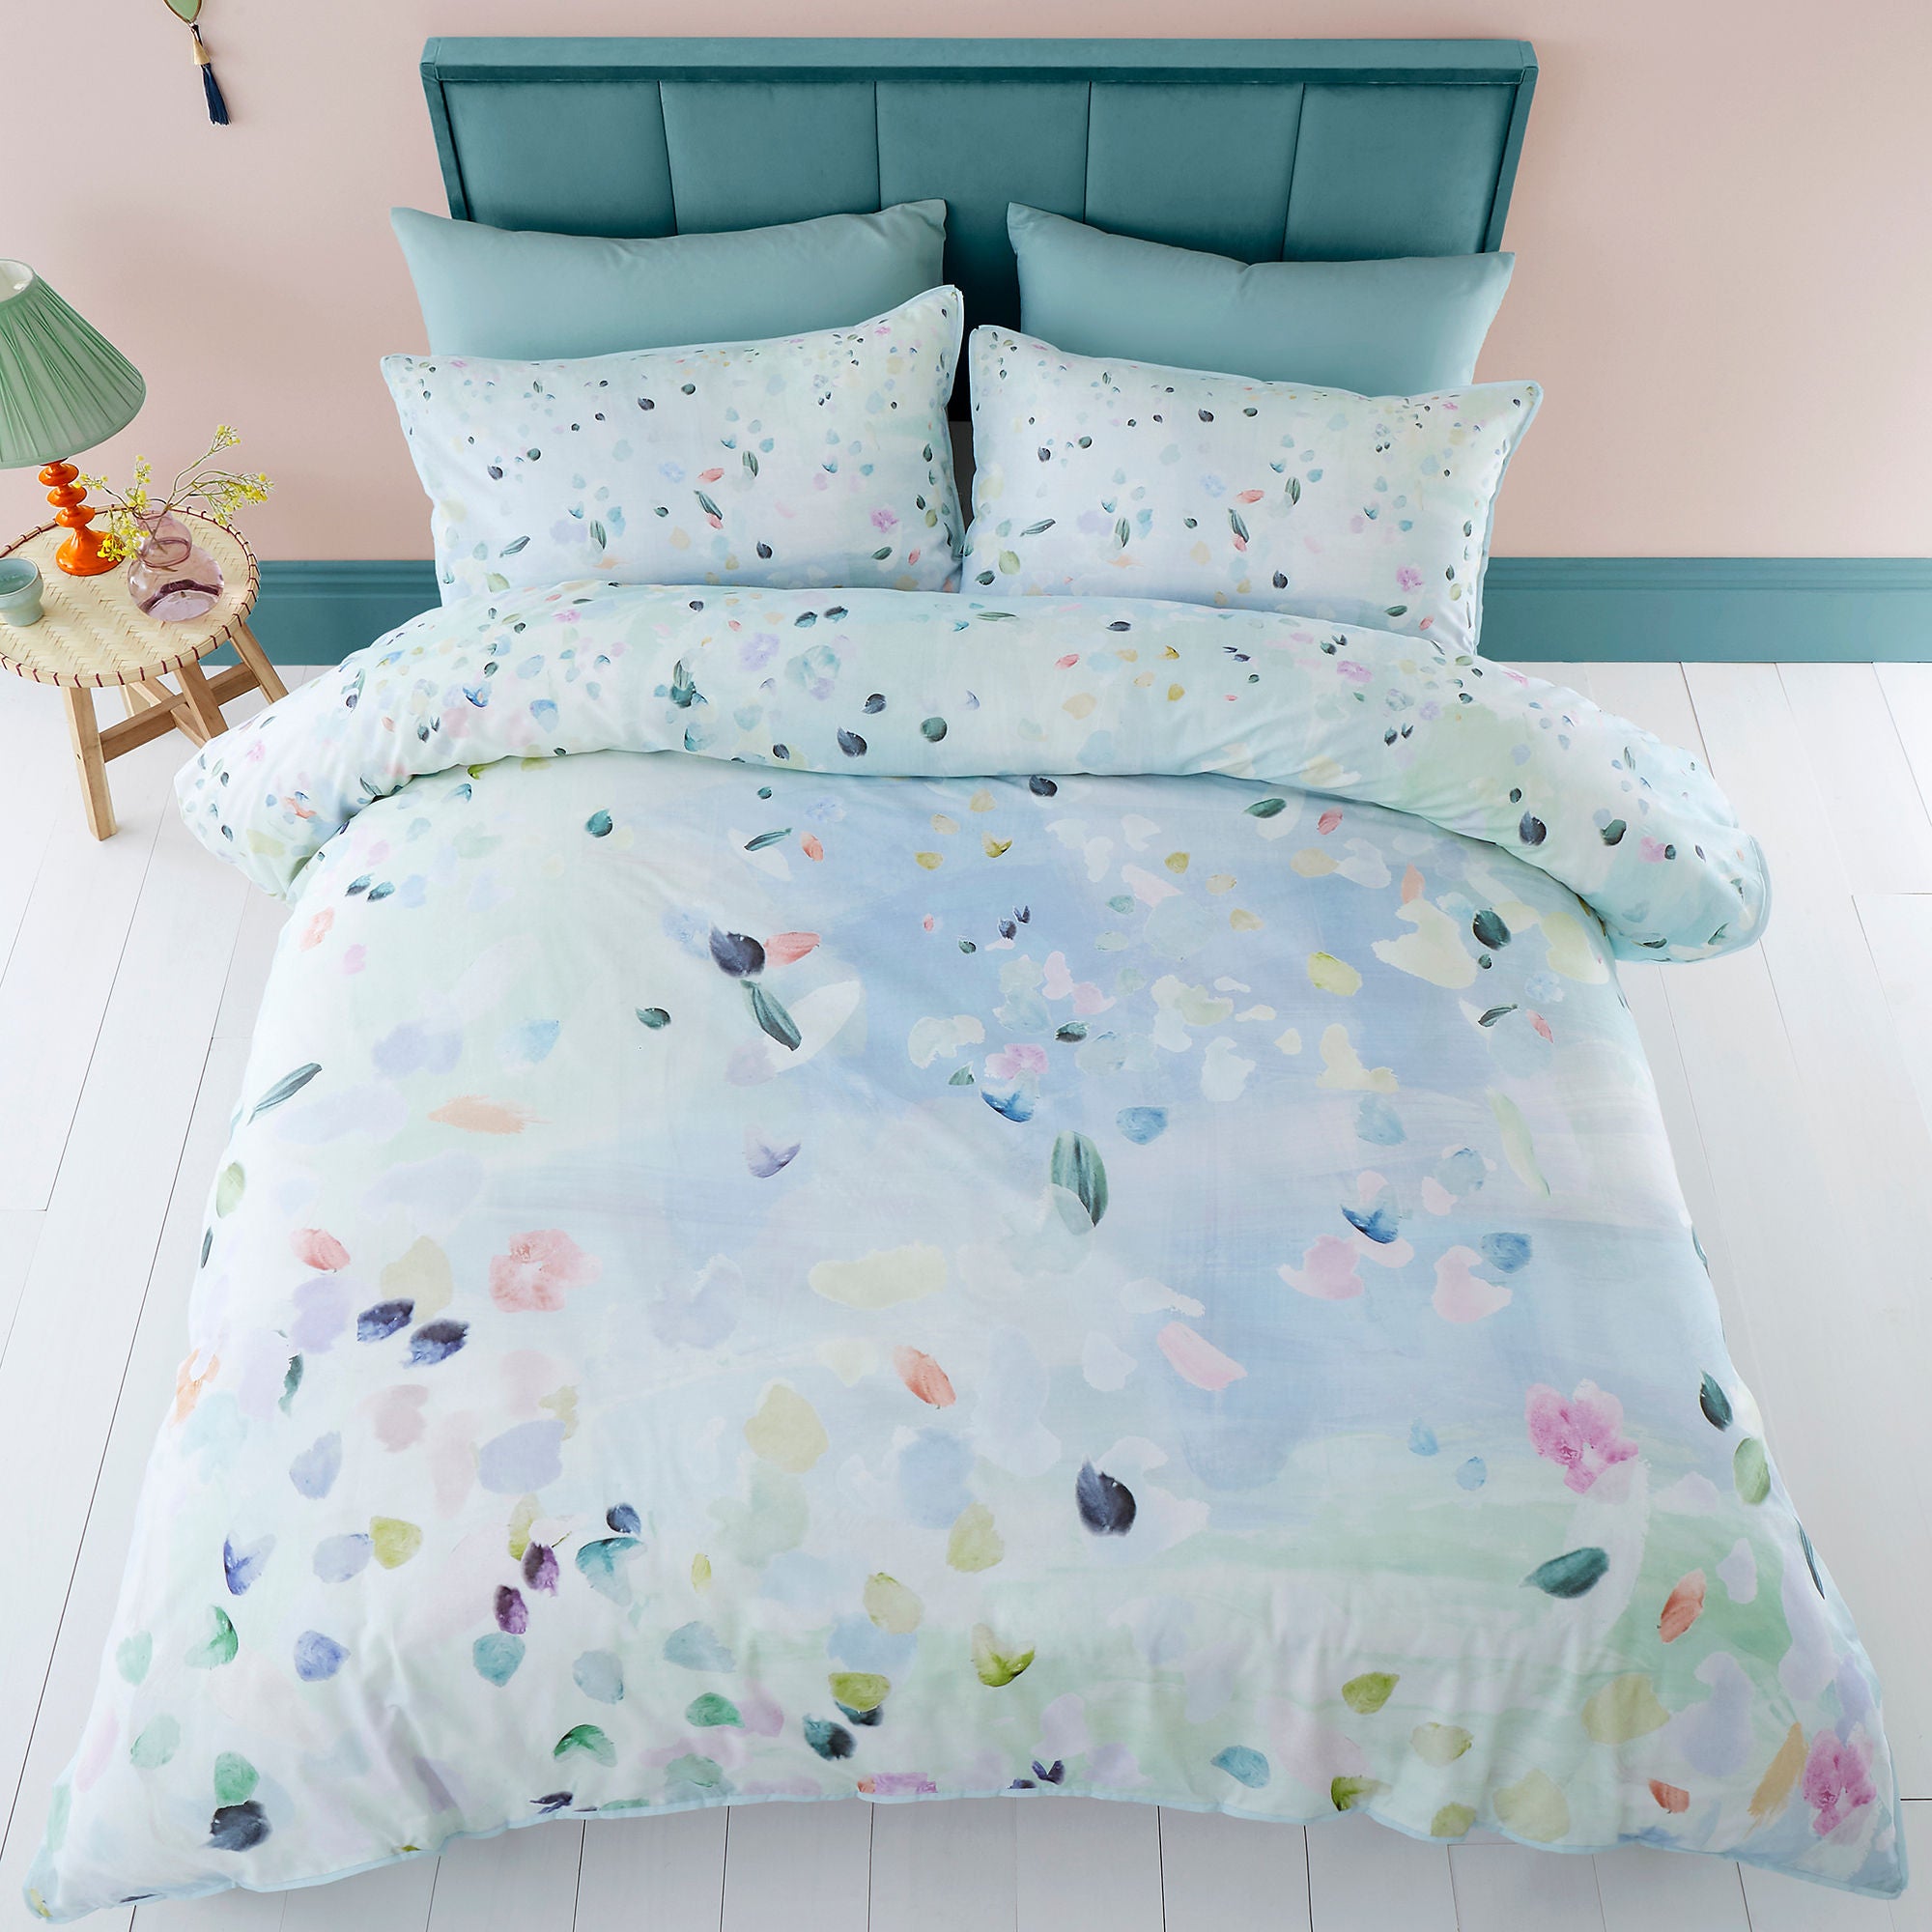 Alfresco Duvet Cover Set by Appletree Style in Duck Egg - Duvet Cover Set - Appletree Style